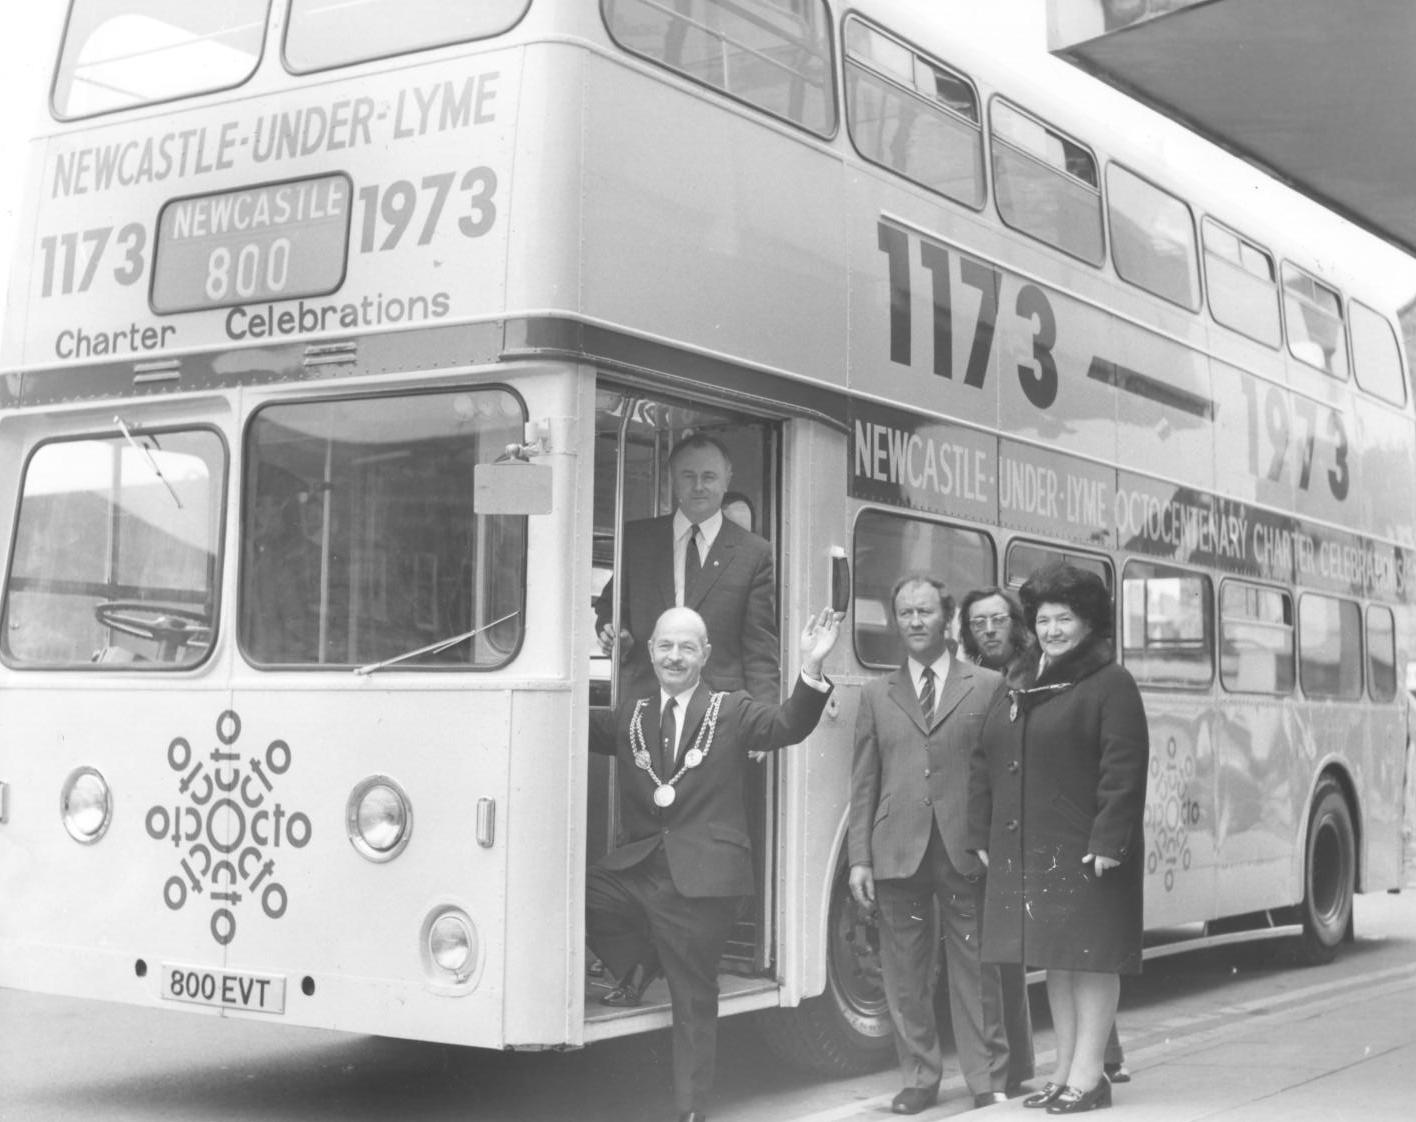 Mayor Charles Mitchell with the Octo bus 1973